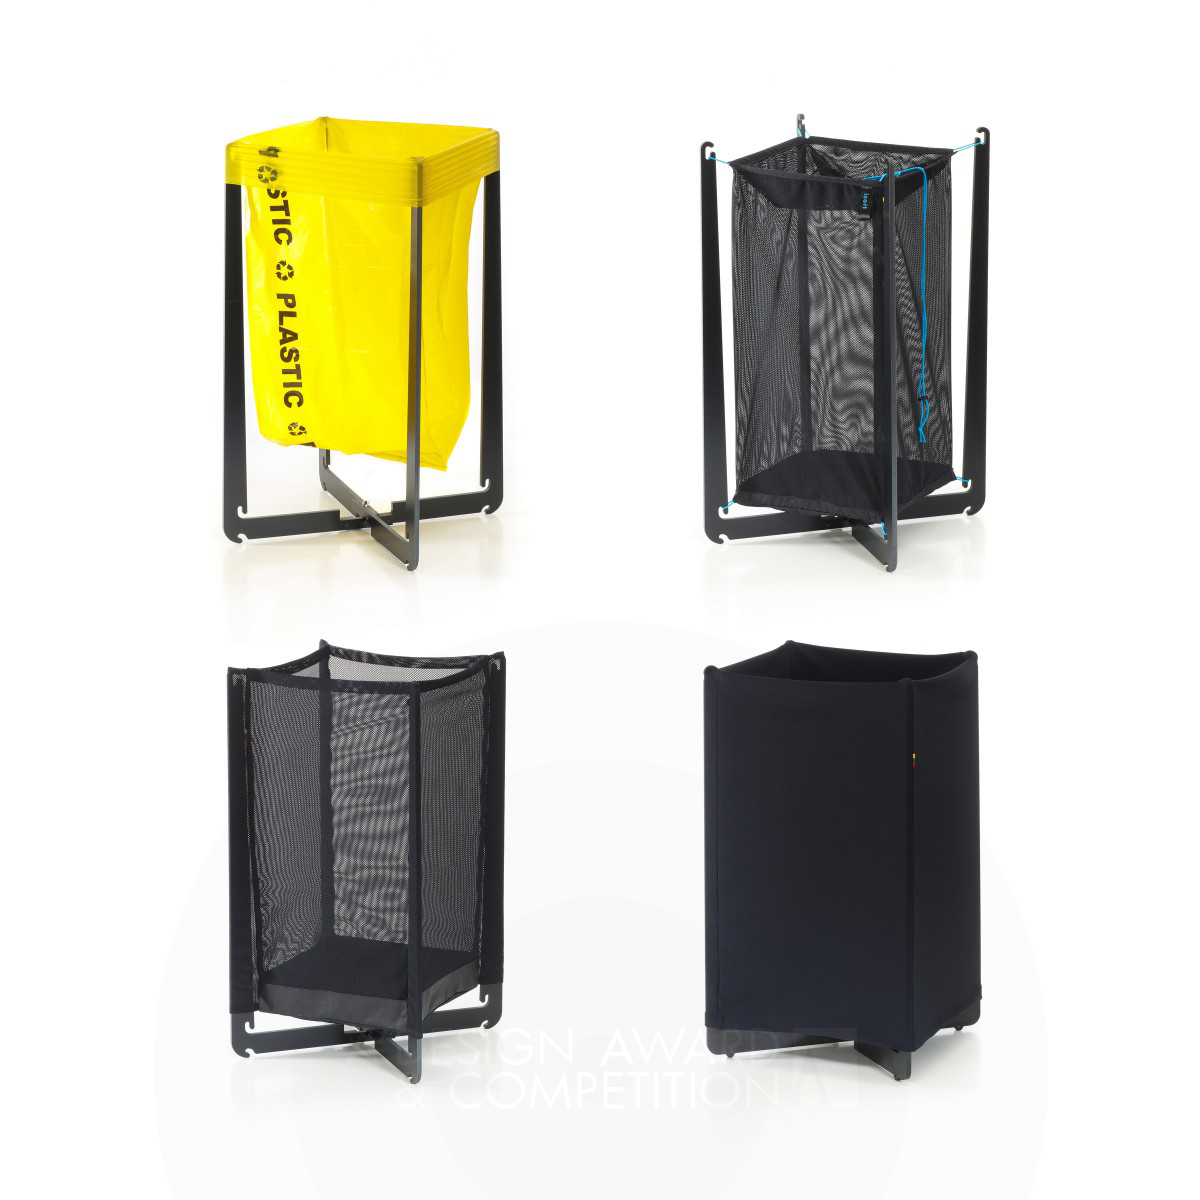 Spider Bin Recyclable Waste Sorting System by Urte Smitaite